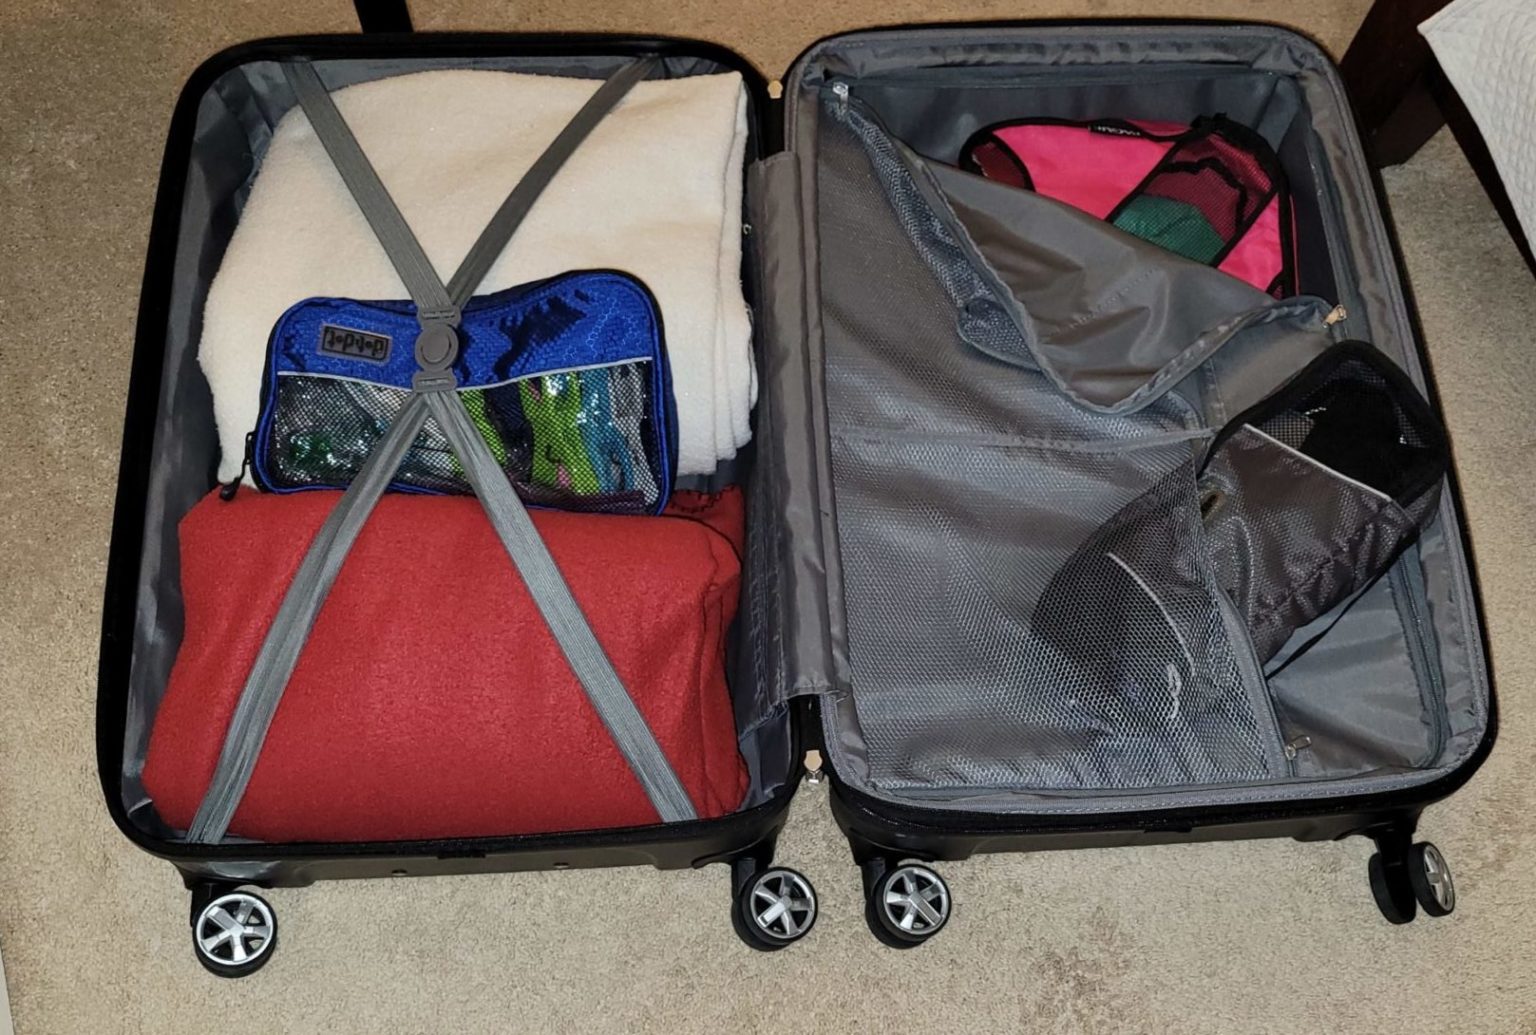 How To Choose The Best Cruise Luggage For Really Easy Family Travel